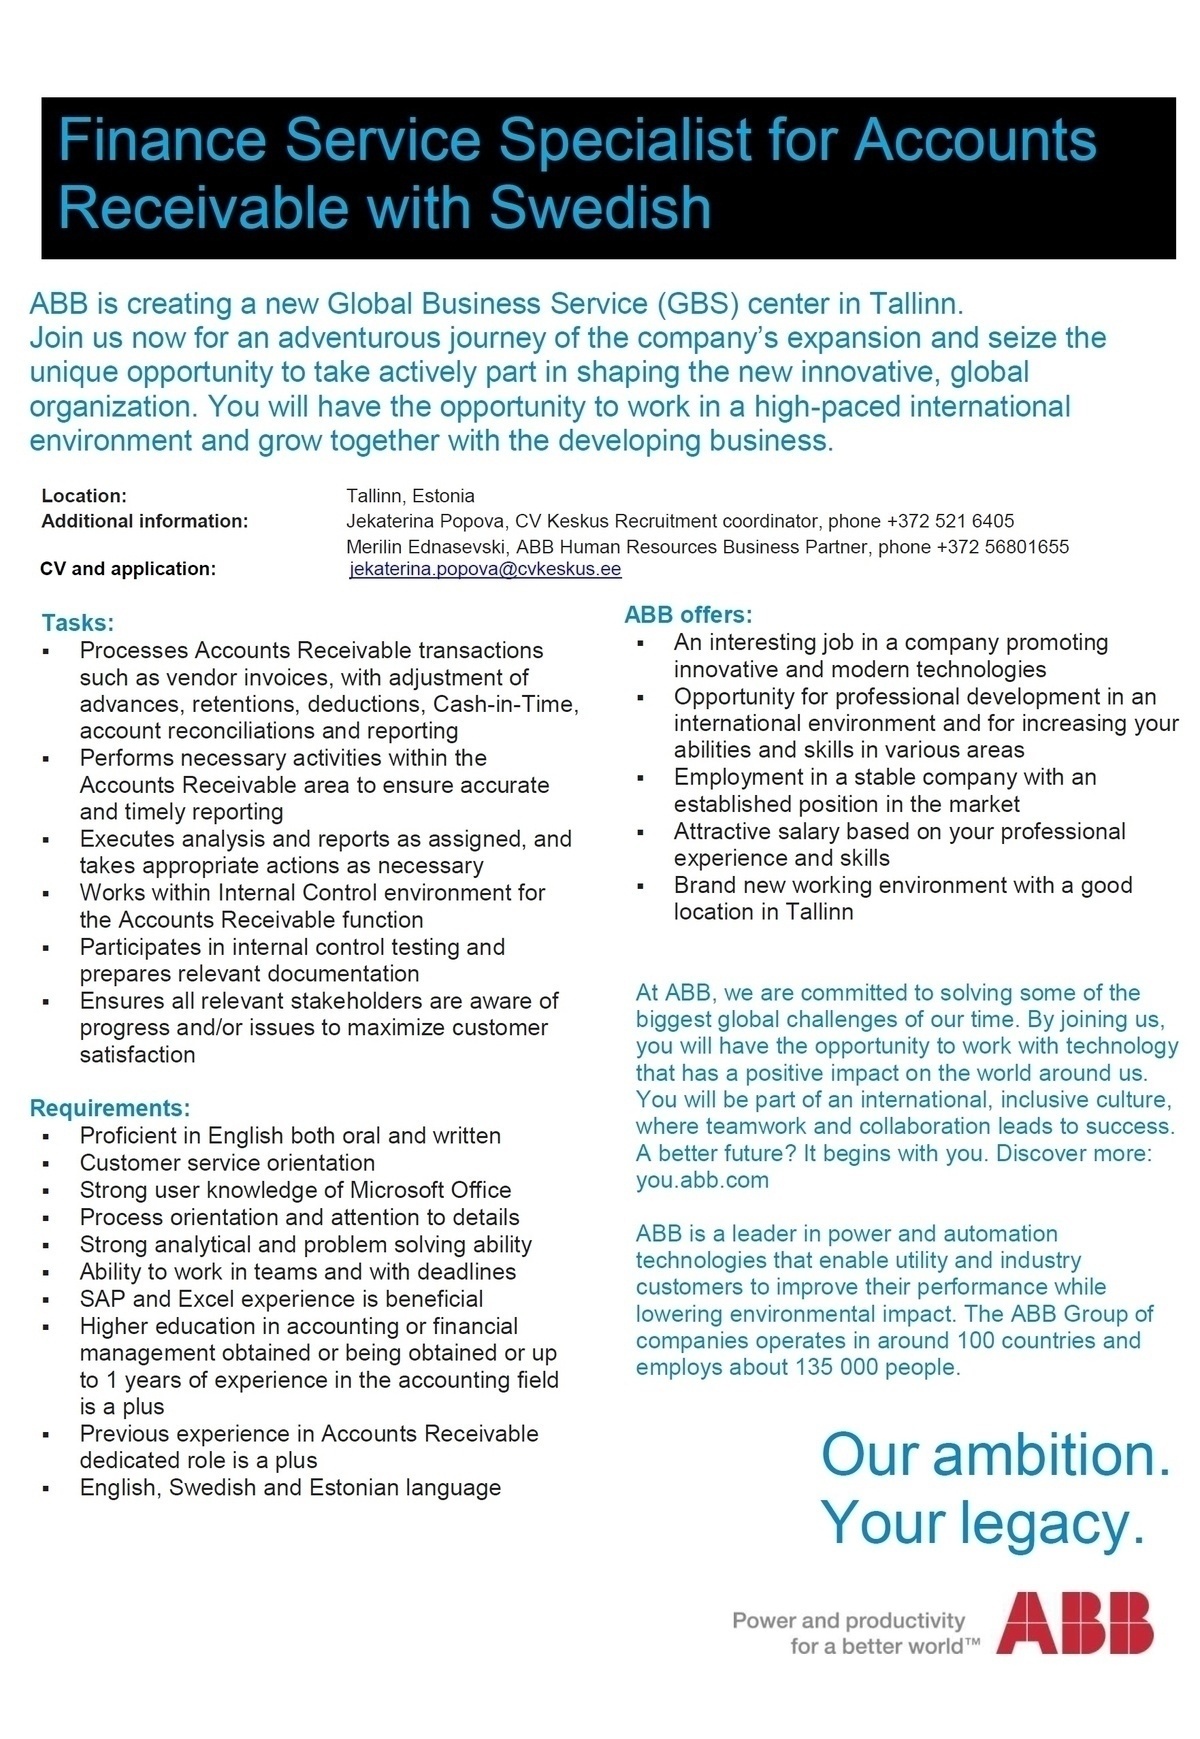 CV KESKUS OÜ ABB is looking for Finance Service Specialist for Accounts Receivable with Swedish